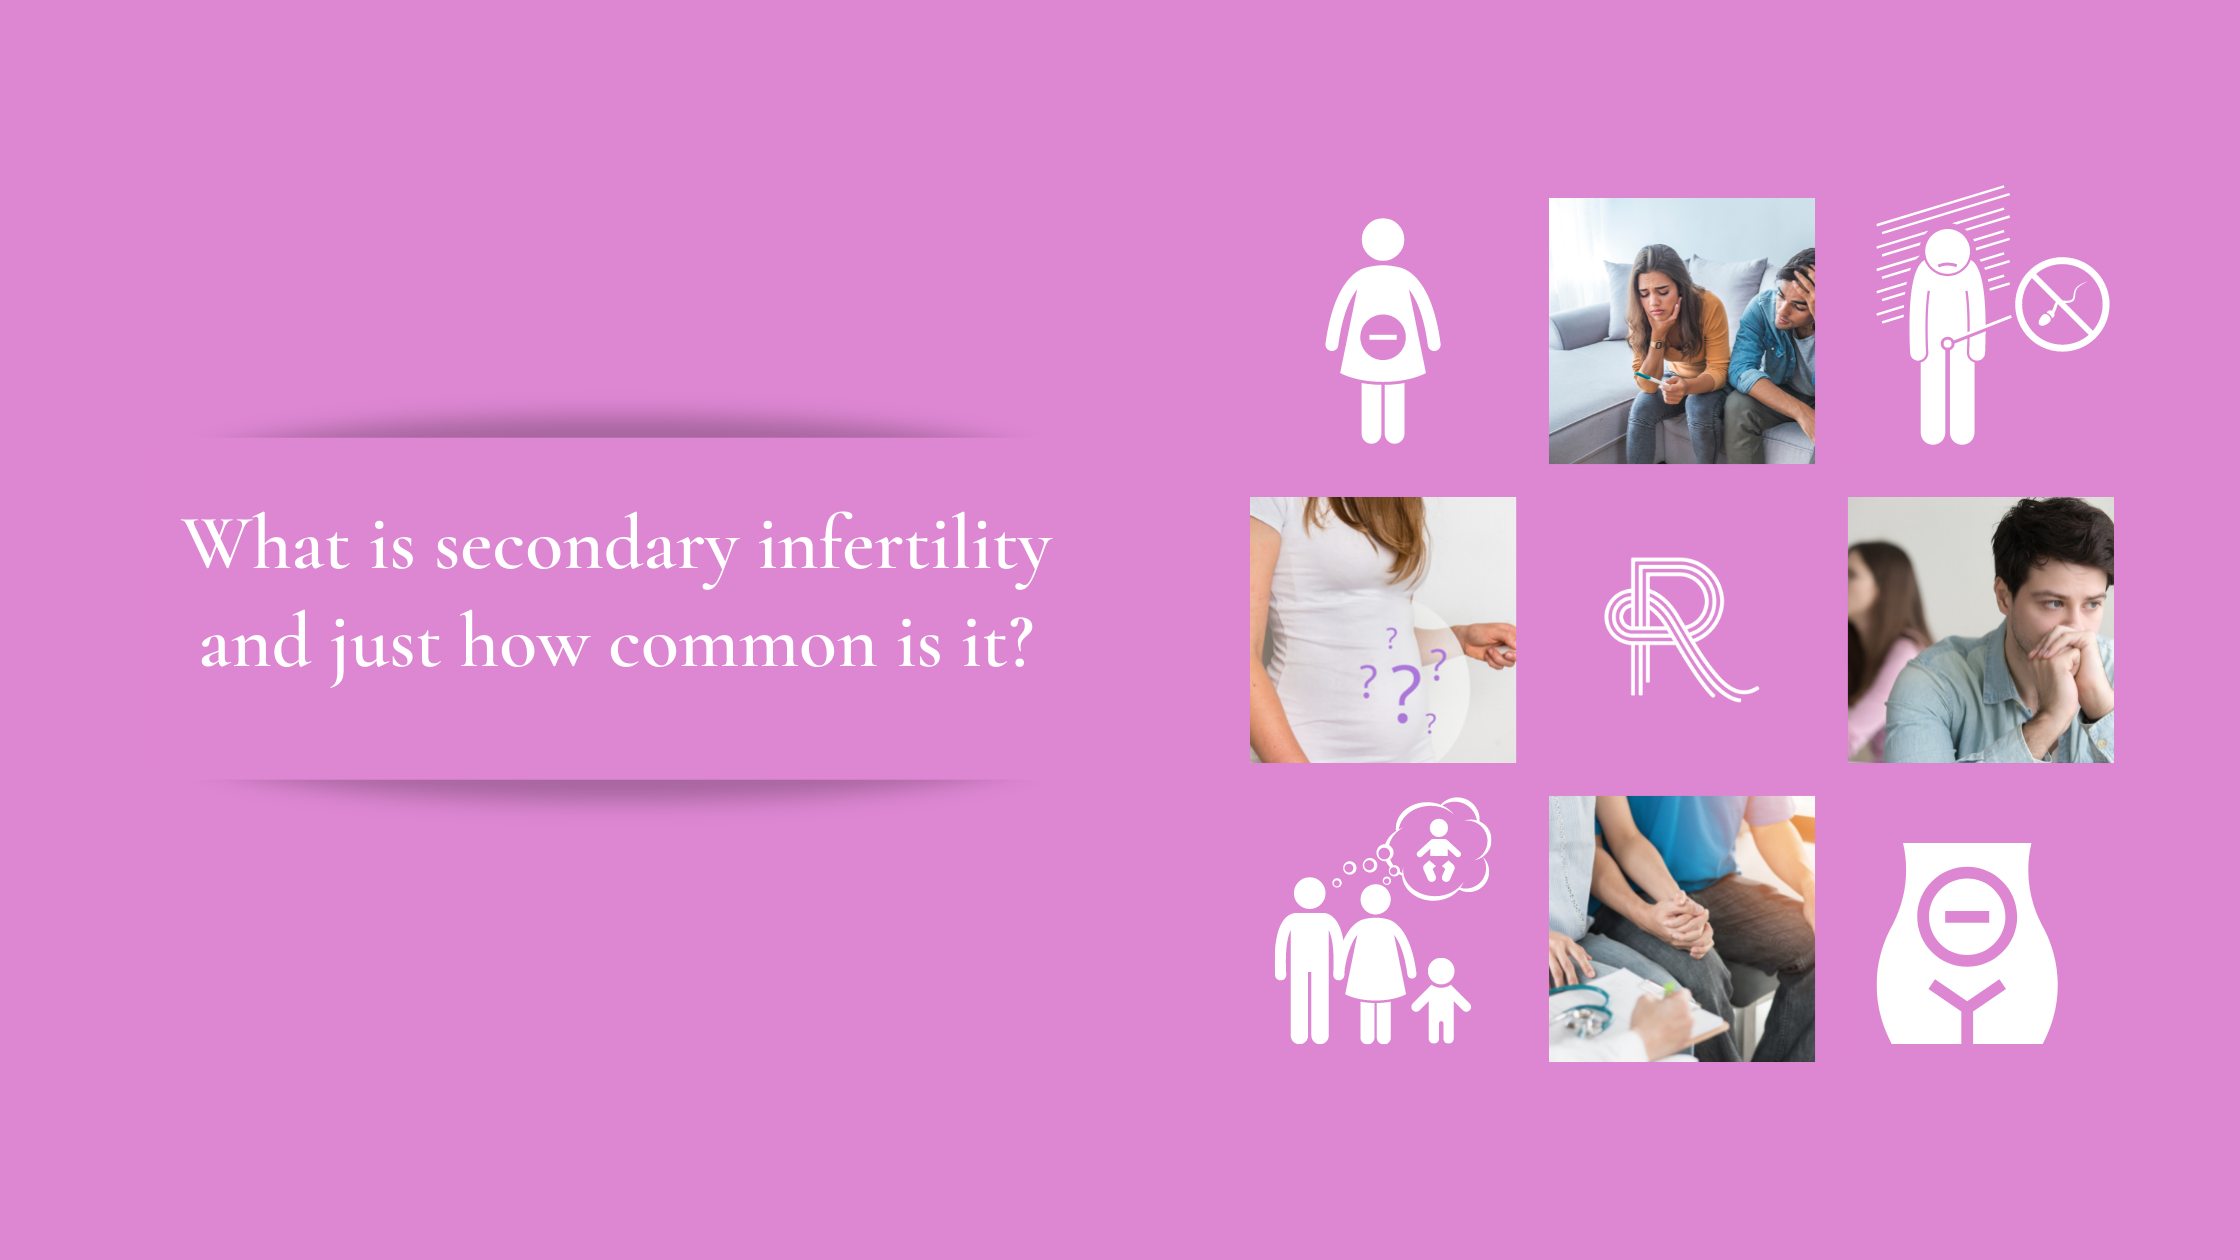 What is secondary infertility? Just how common is it? And what should you do if you are having difficulty?